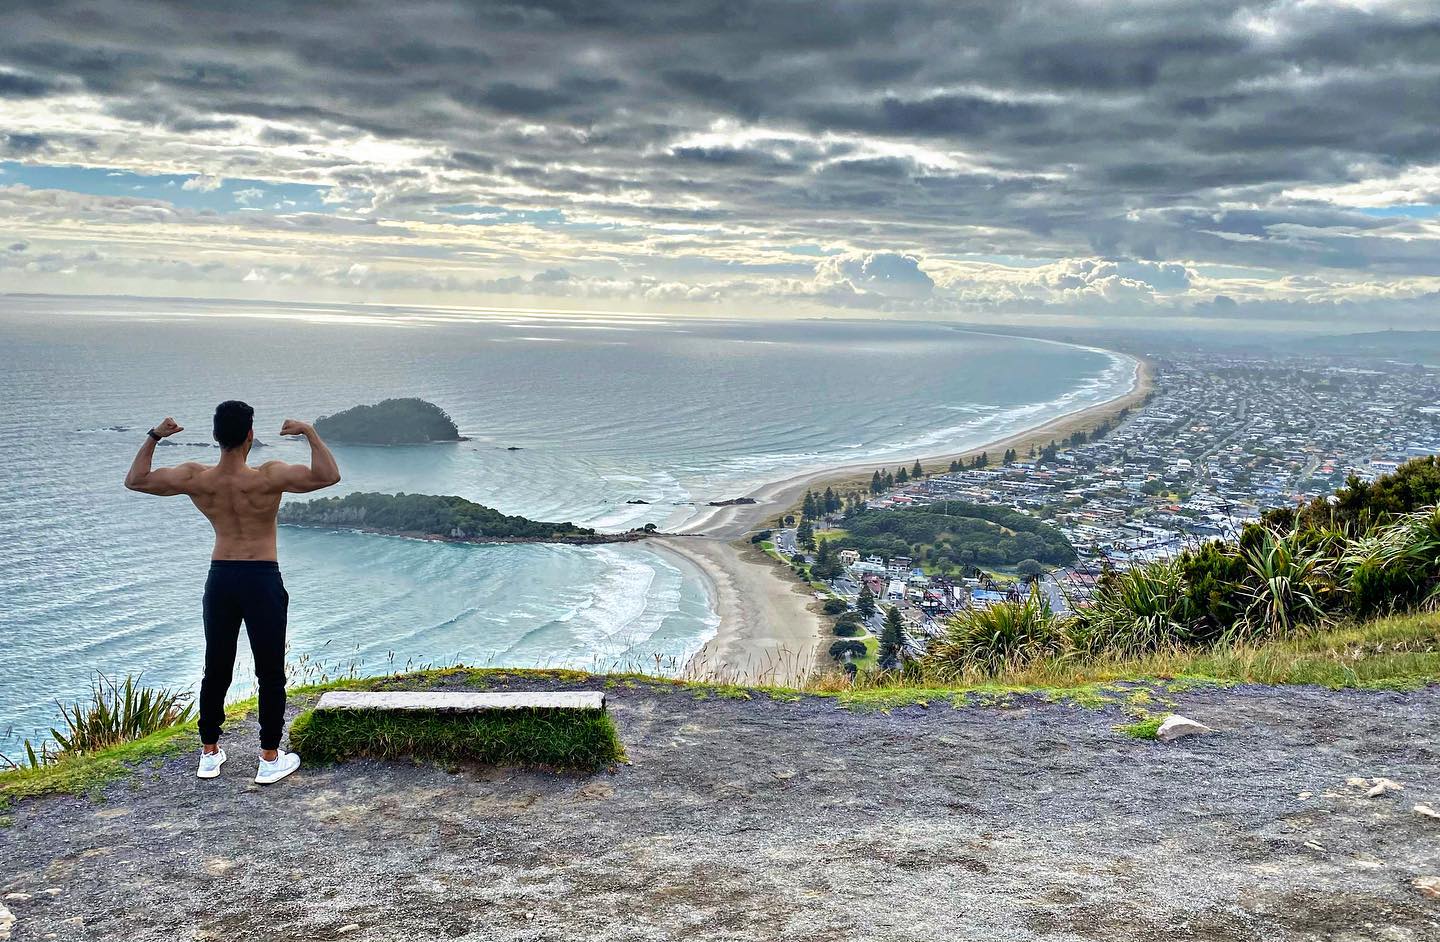 🌞 “Without goals, and plans to reach them, you are like a ship that has set sail with no destination.” –Fitzhugh Dodson

#summervibes #summer #fitness #newzealand #morning #mountmaunganui #hiking #24december2020